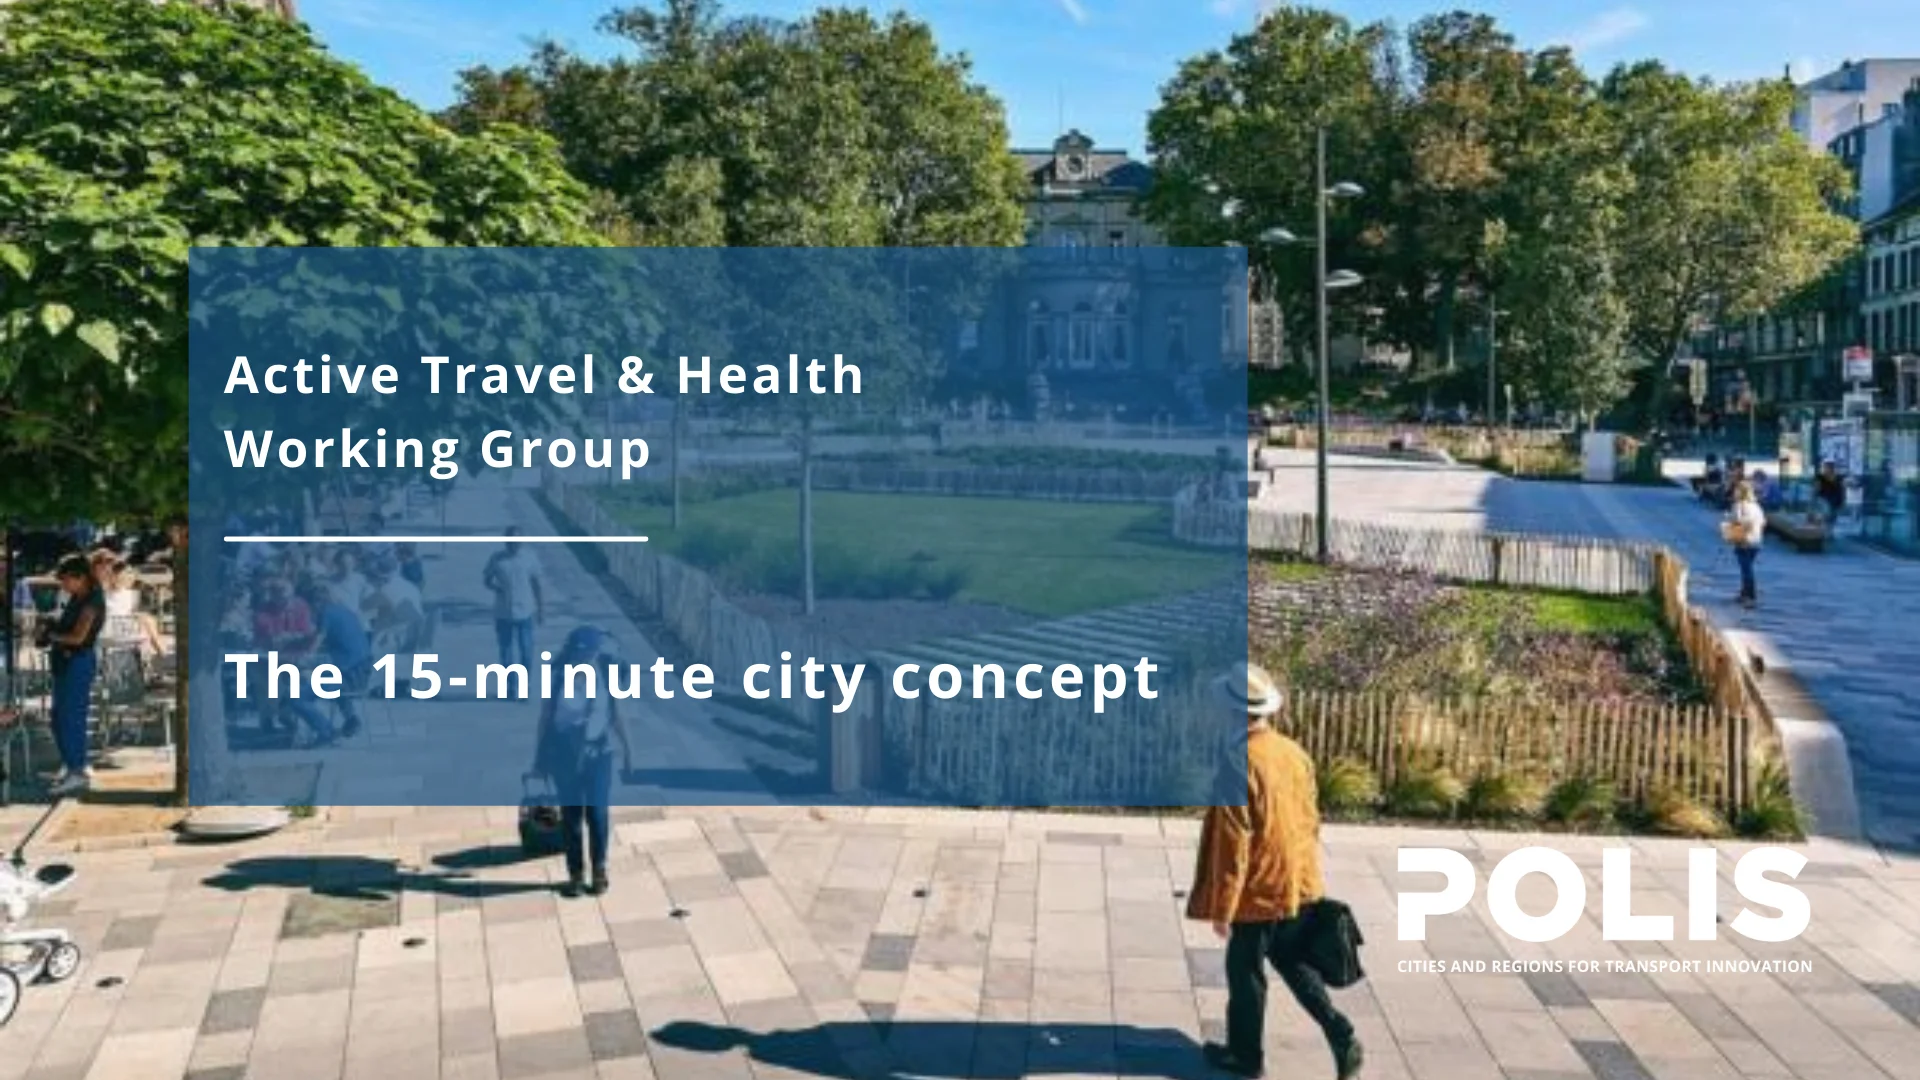 POLIS’ Active Travel Working Group explores the 15-minute city concept